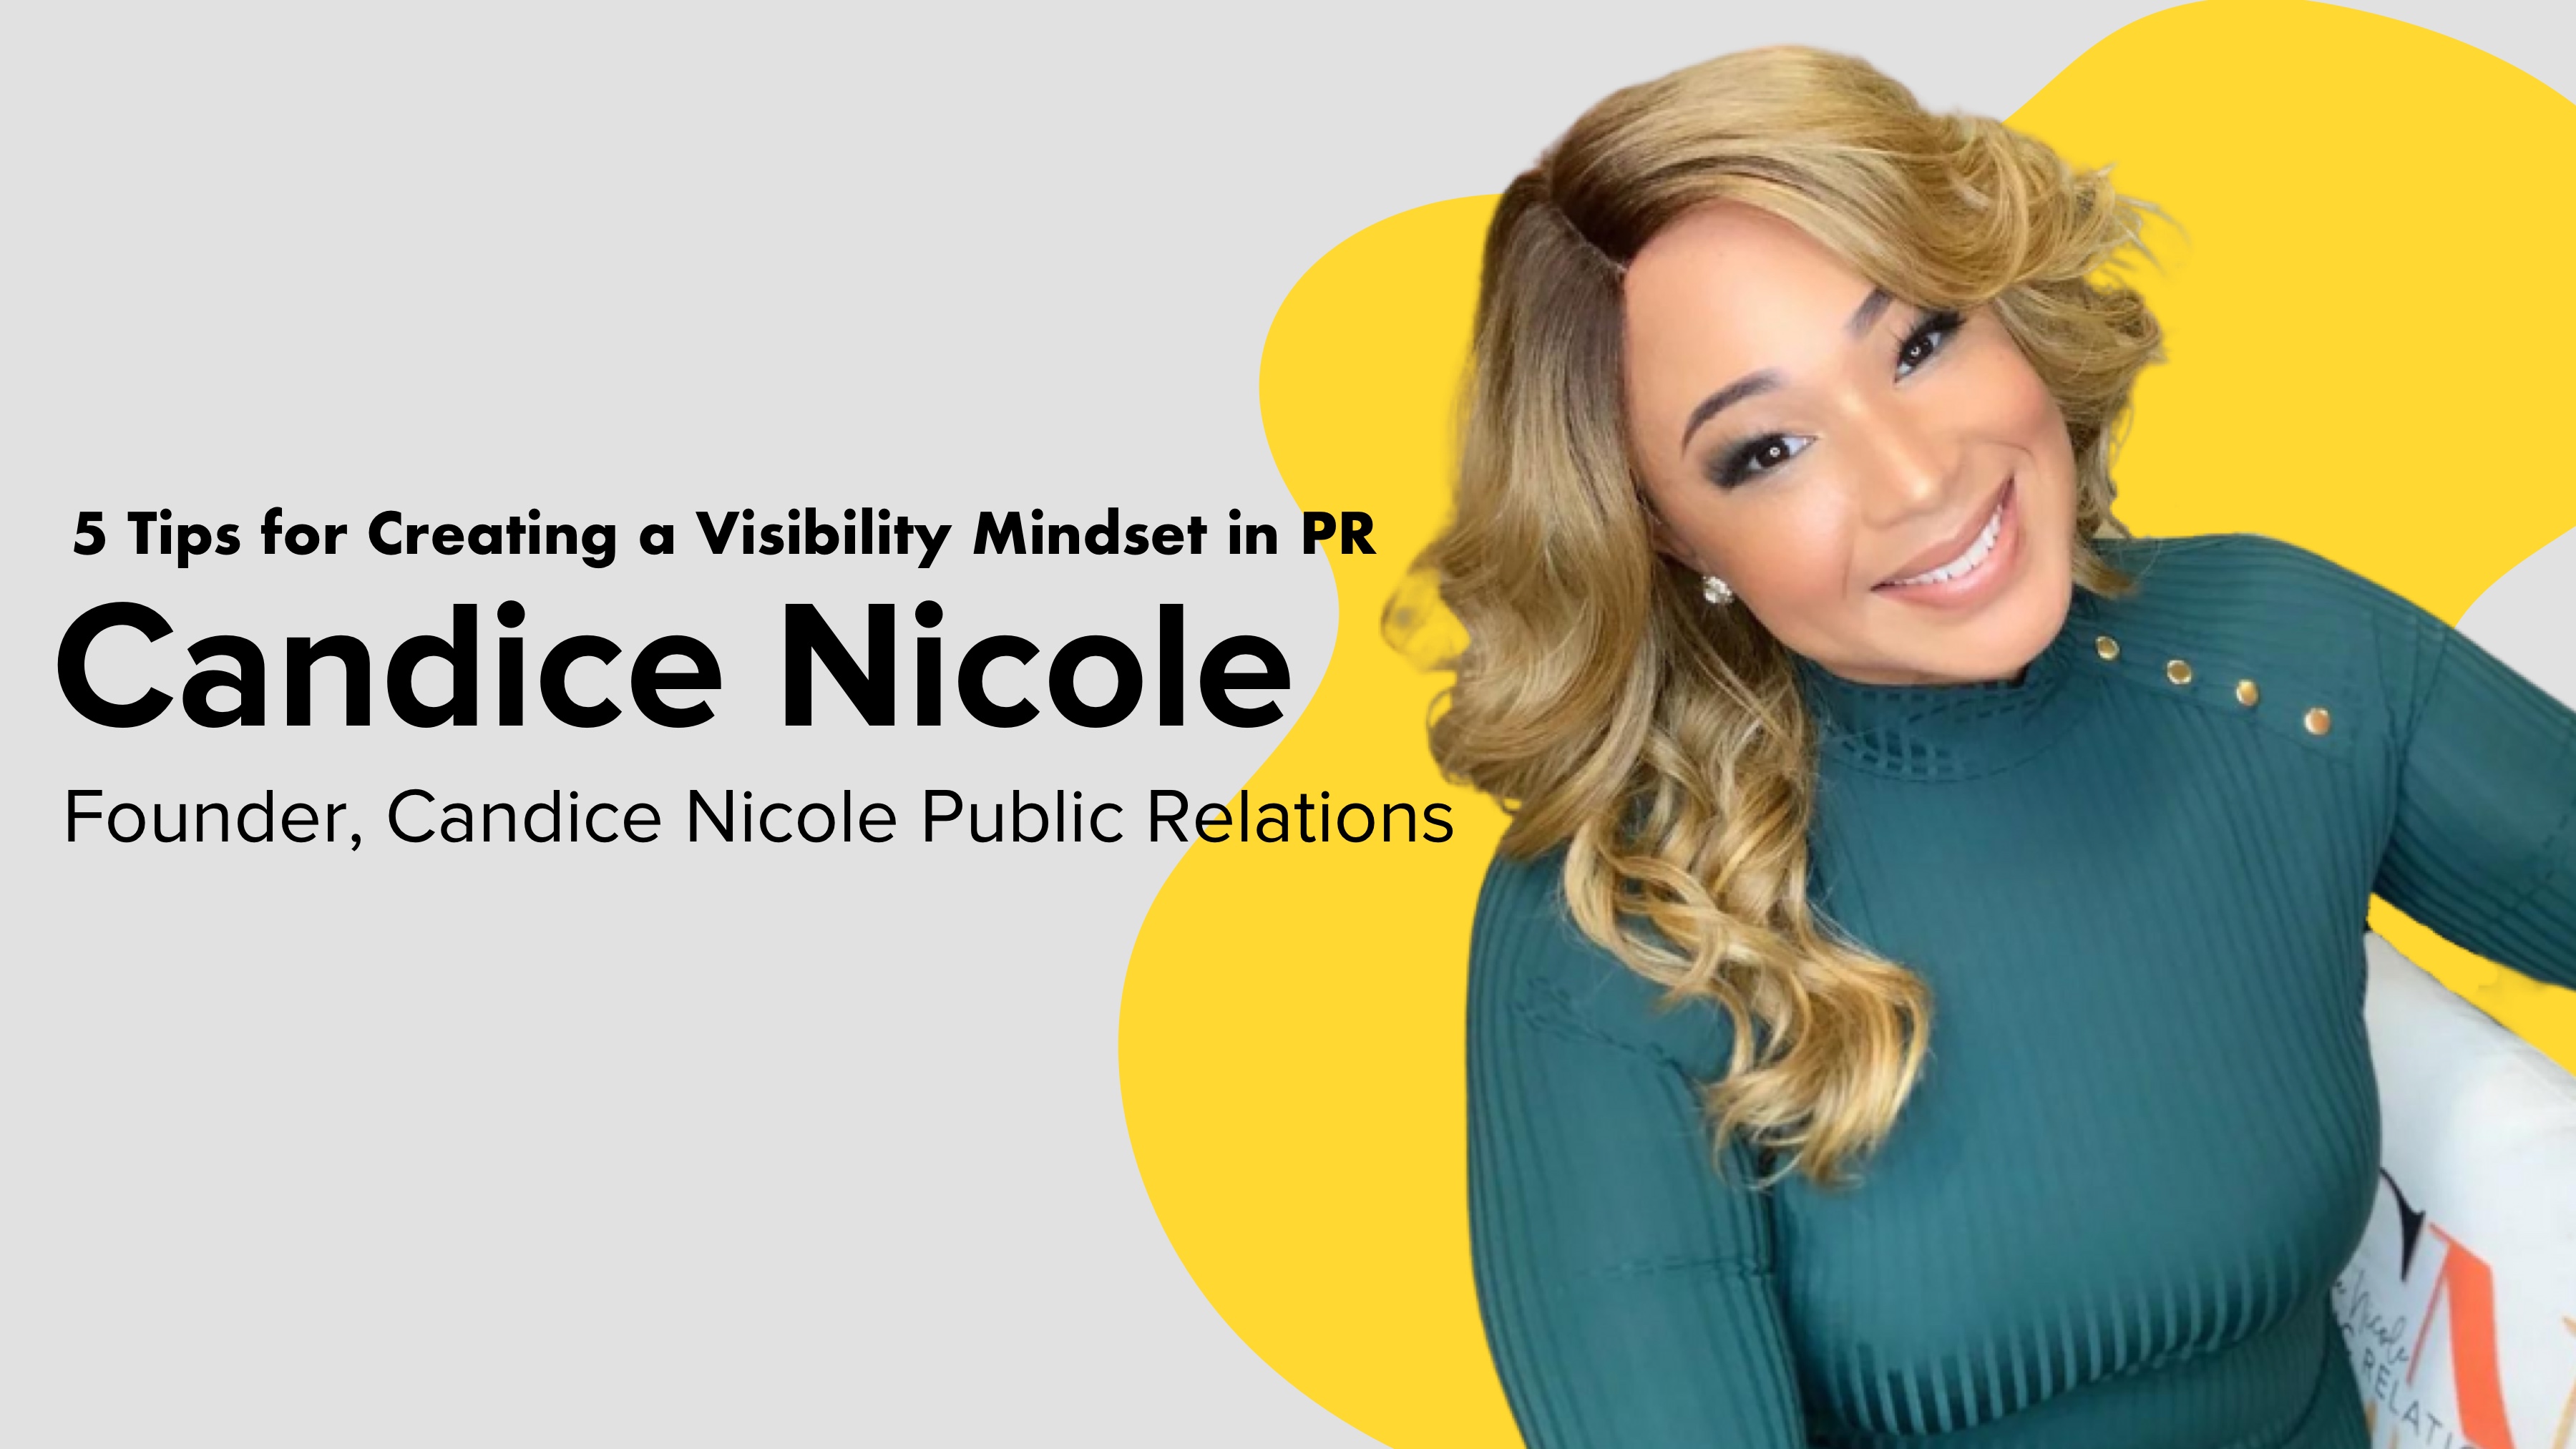 5 Tips for Creating a Visibility Mindset in PR